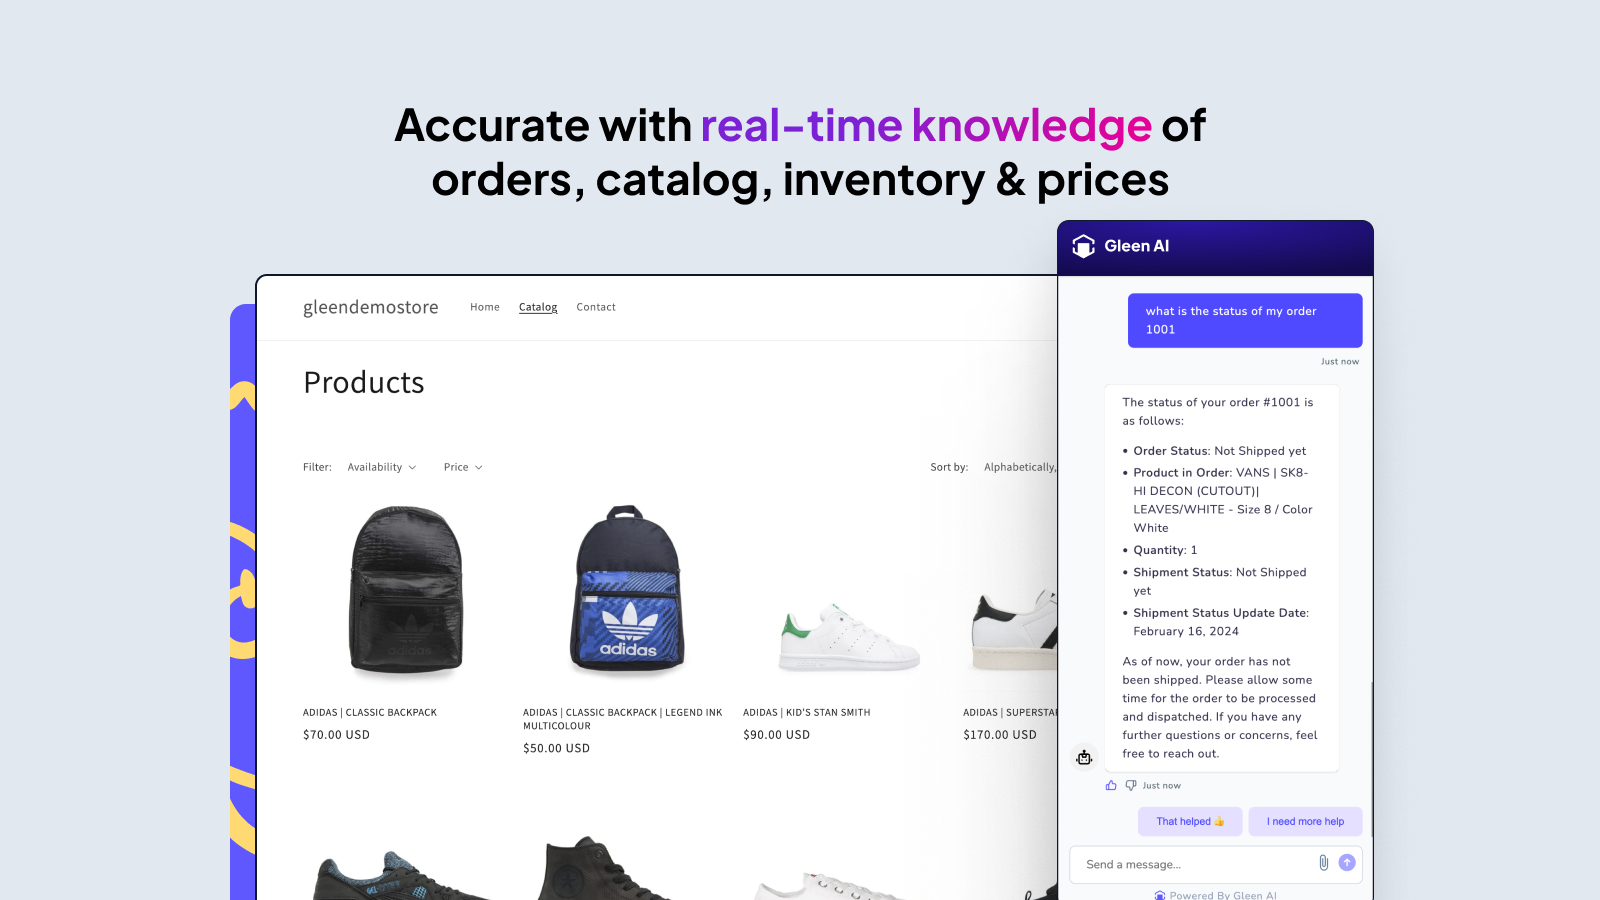 Gleen AI has real-time knowledge of orders, catalog, Prices